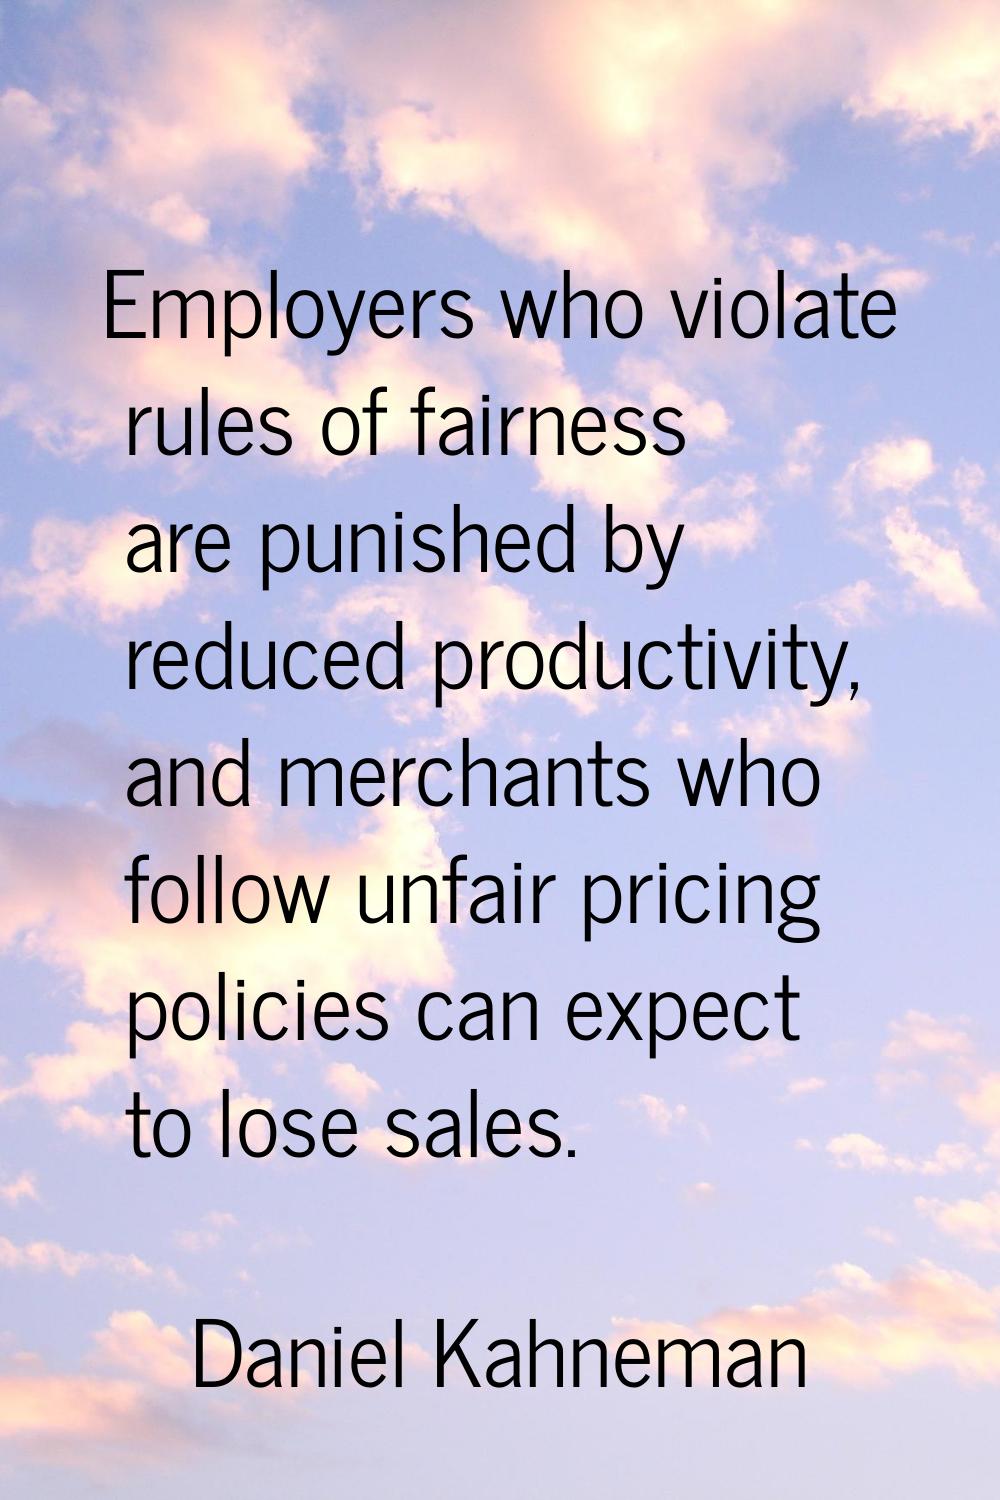 Employers who violate rules of fairness are punished by reduced productivity, and merchants who fol